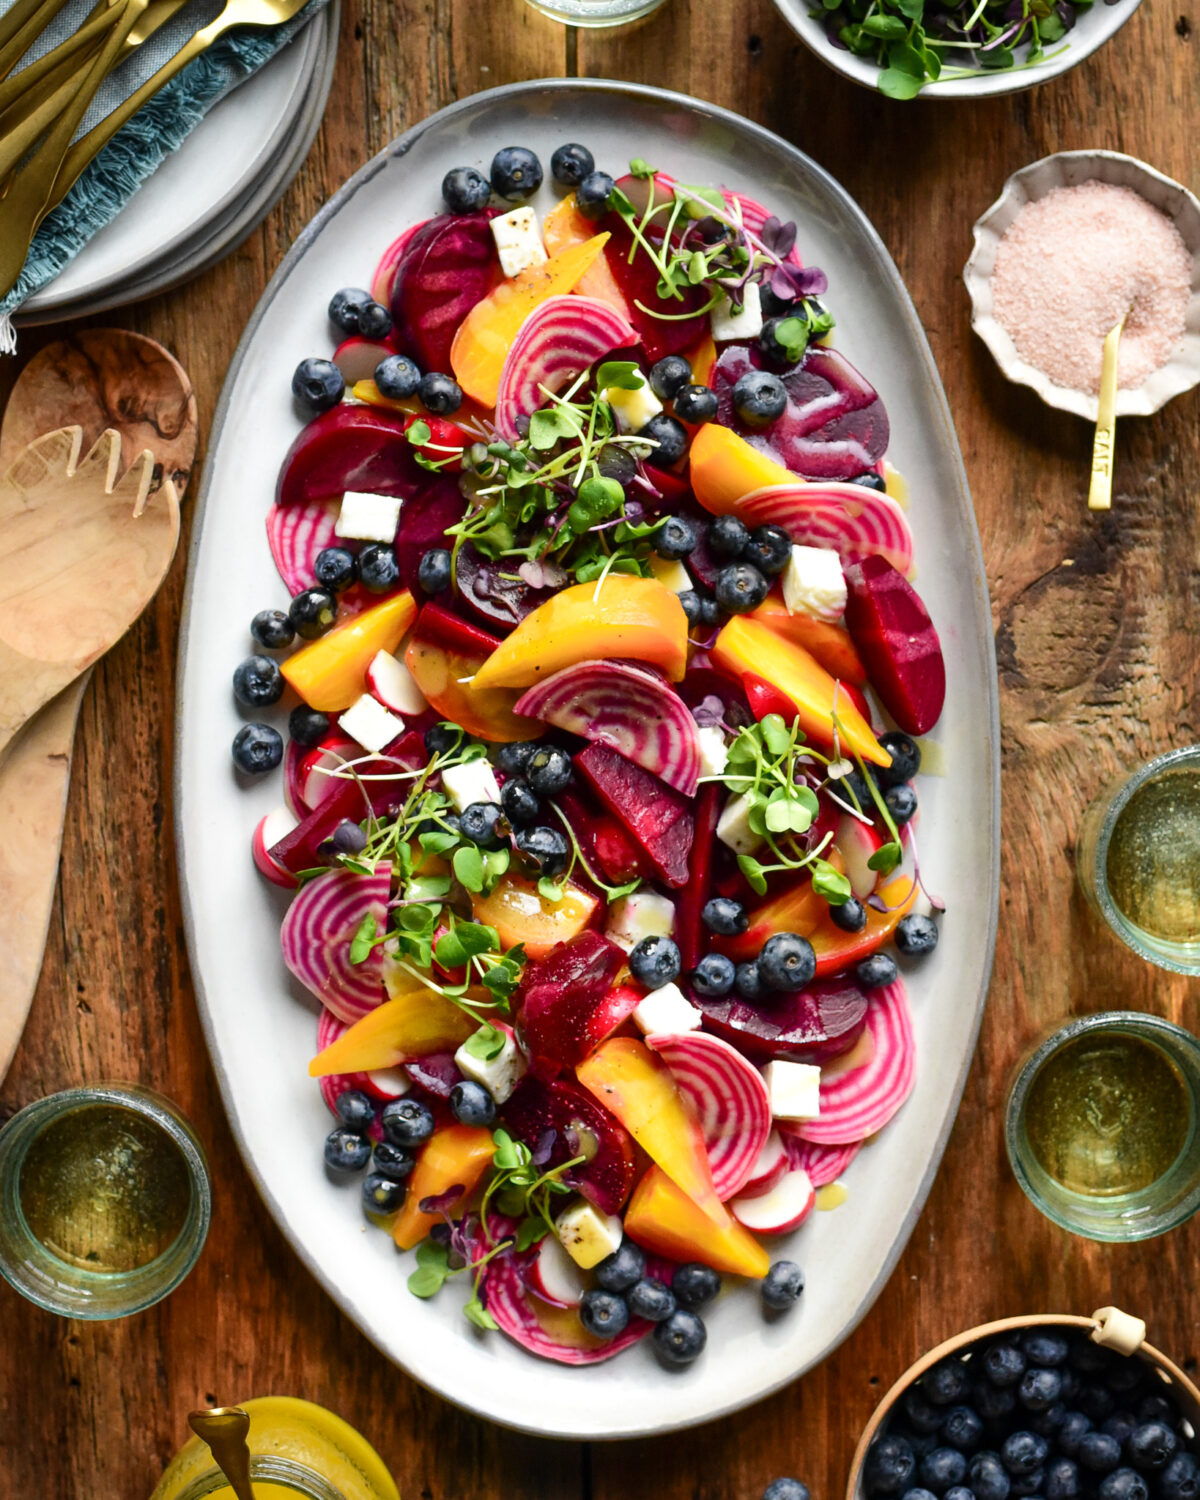 A platter of a sous-vide beet salad with three varieties of beets, radishes, blueberries, micro greens and feta cheese. Served with wine, extra micro greens and blueberries.